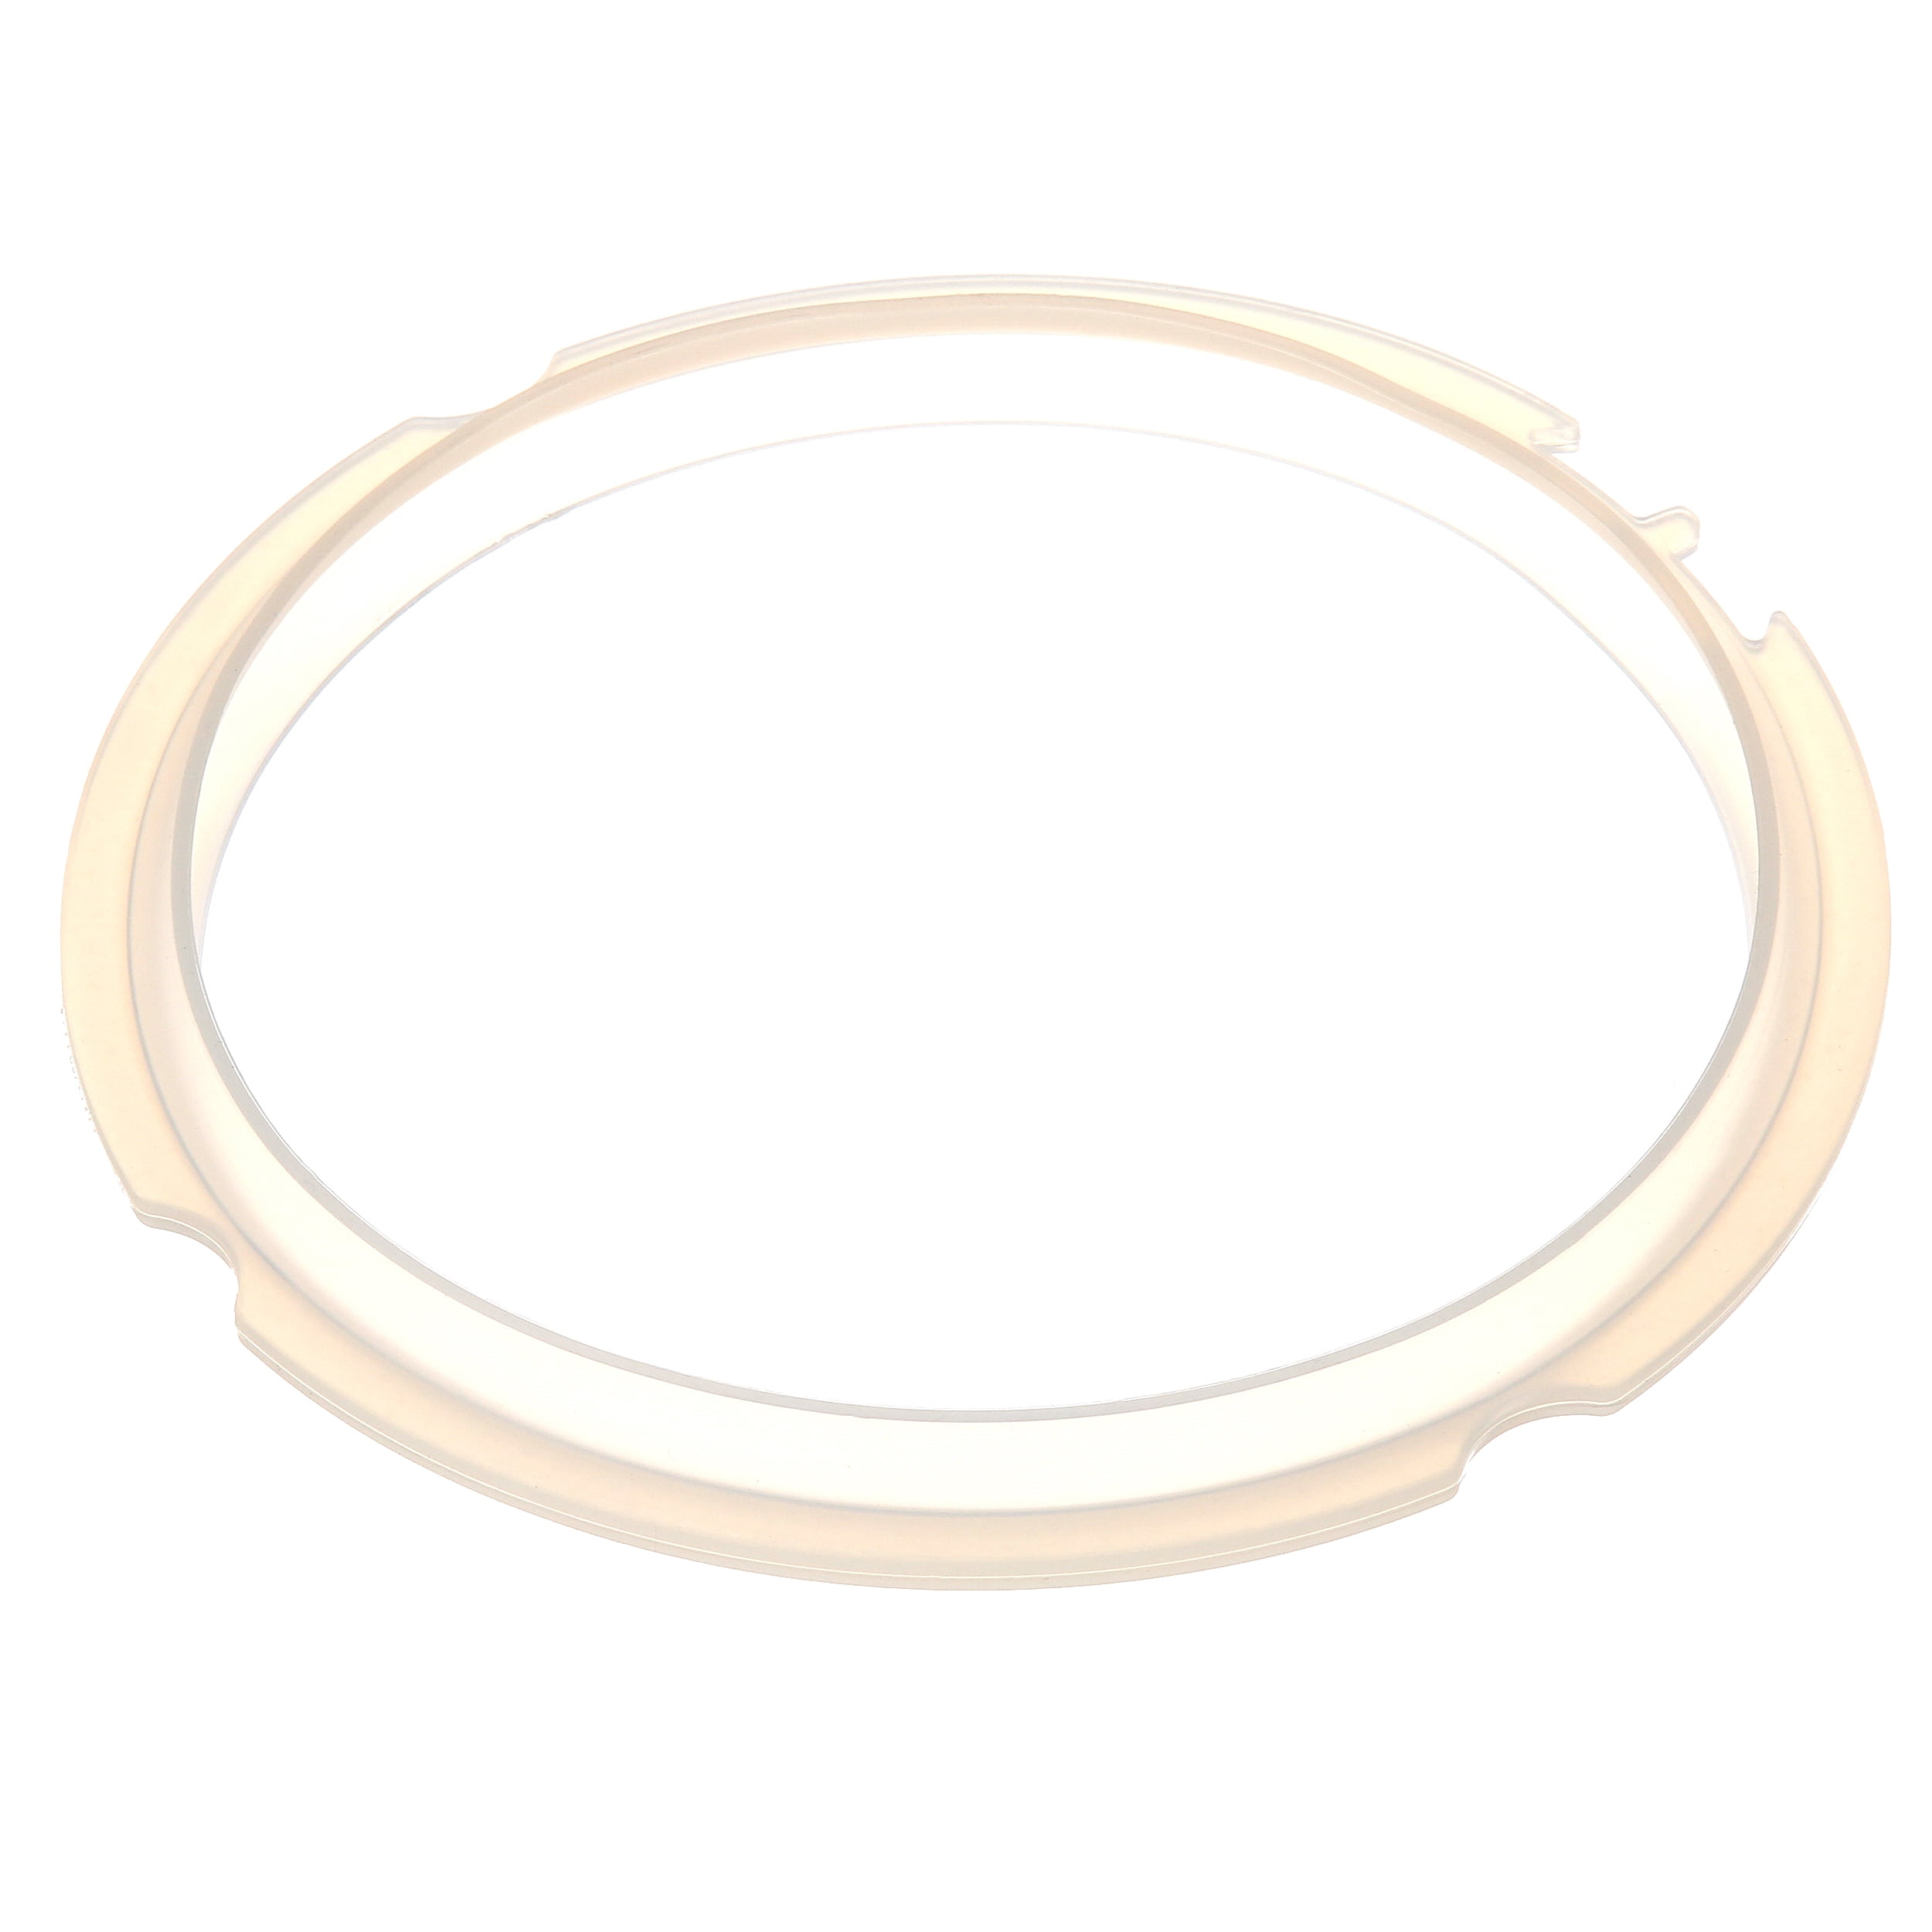 Instant Pot® 3-quart Clear Sealing Ring, 2-pack